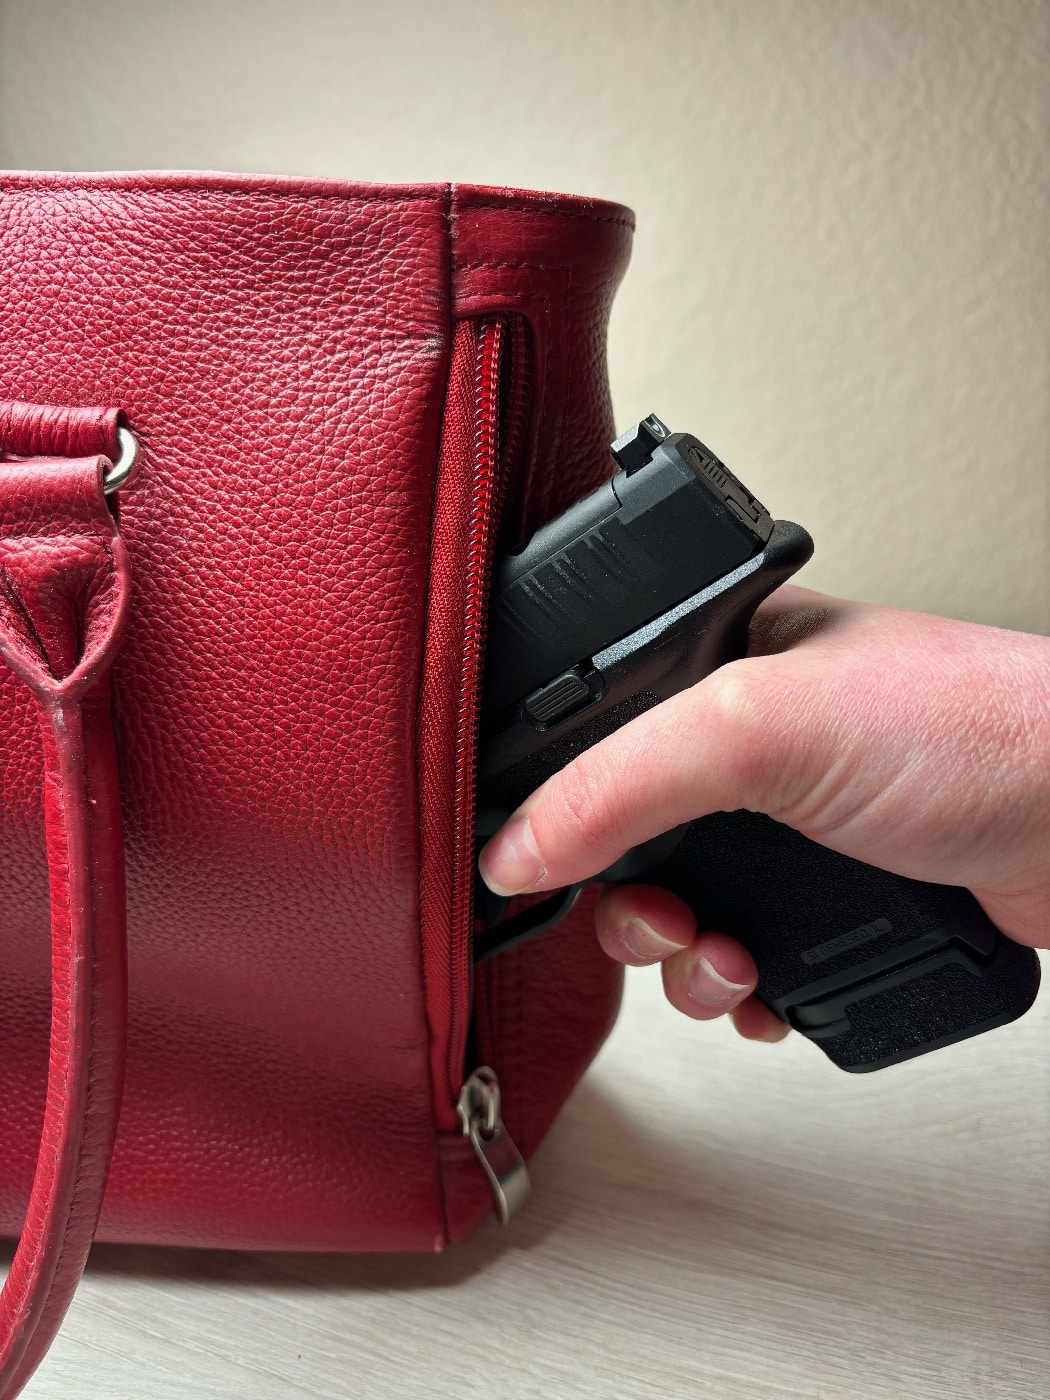 author pulling pistol from purse